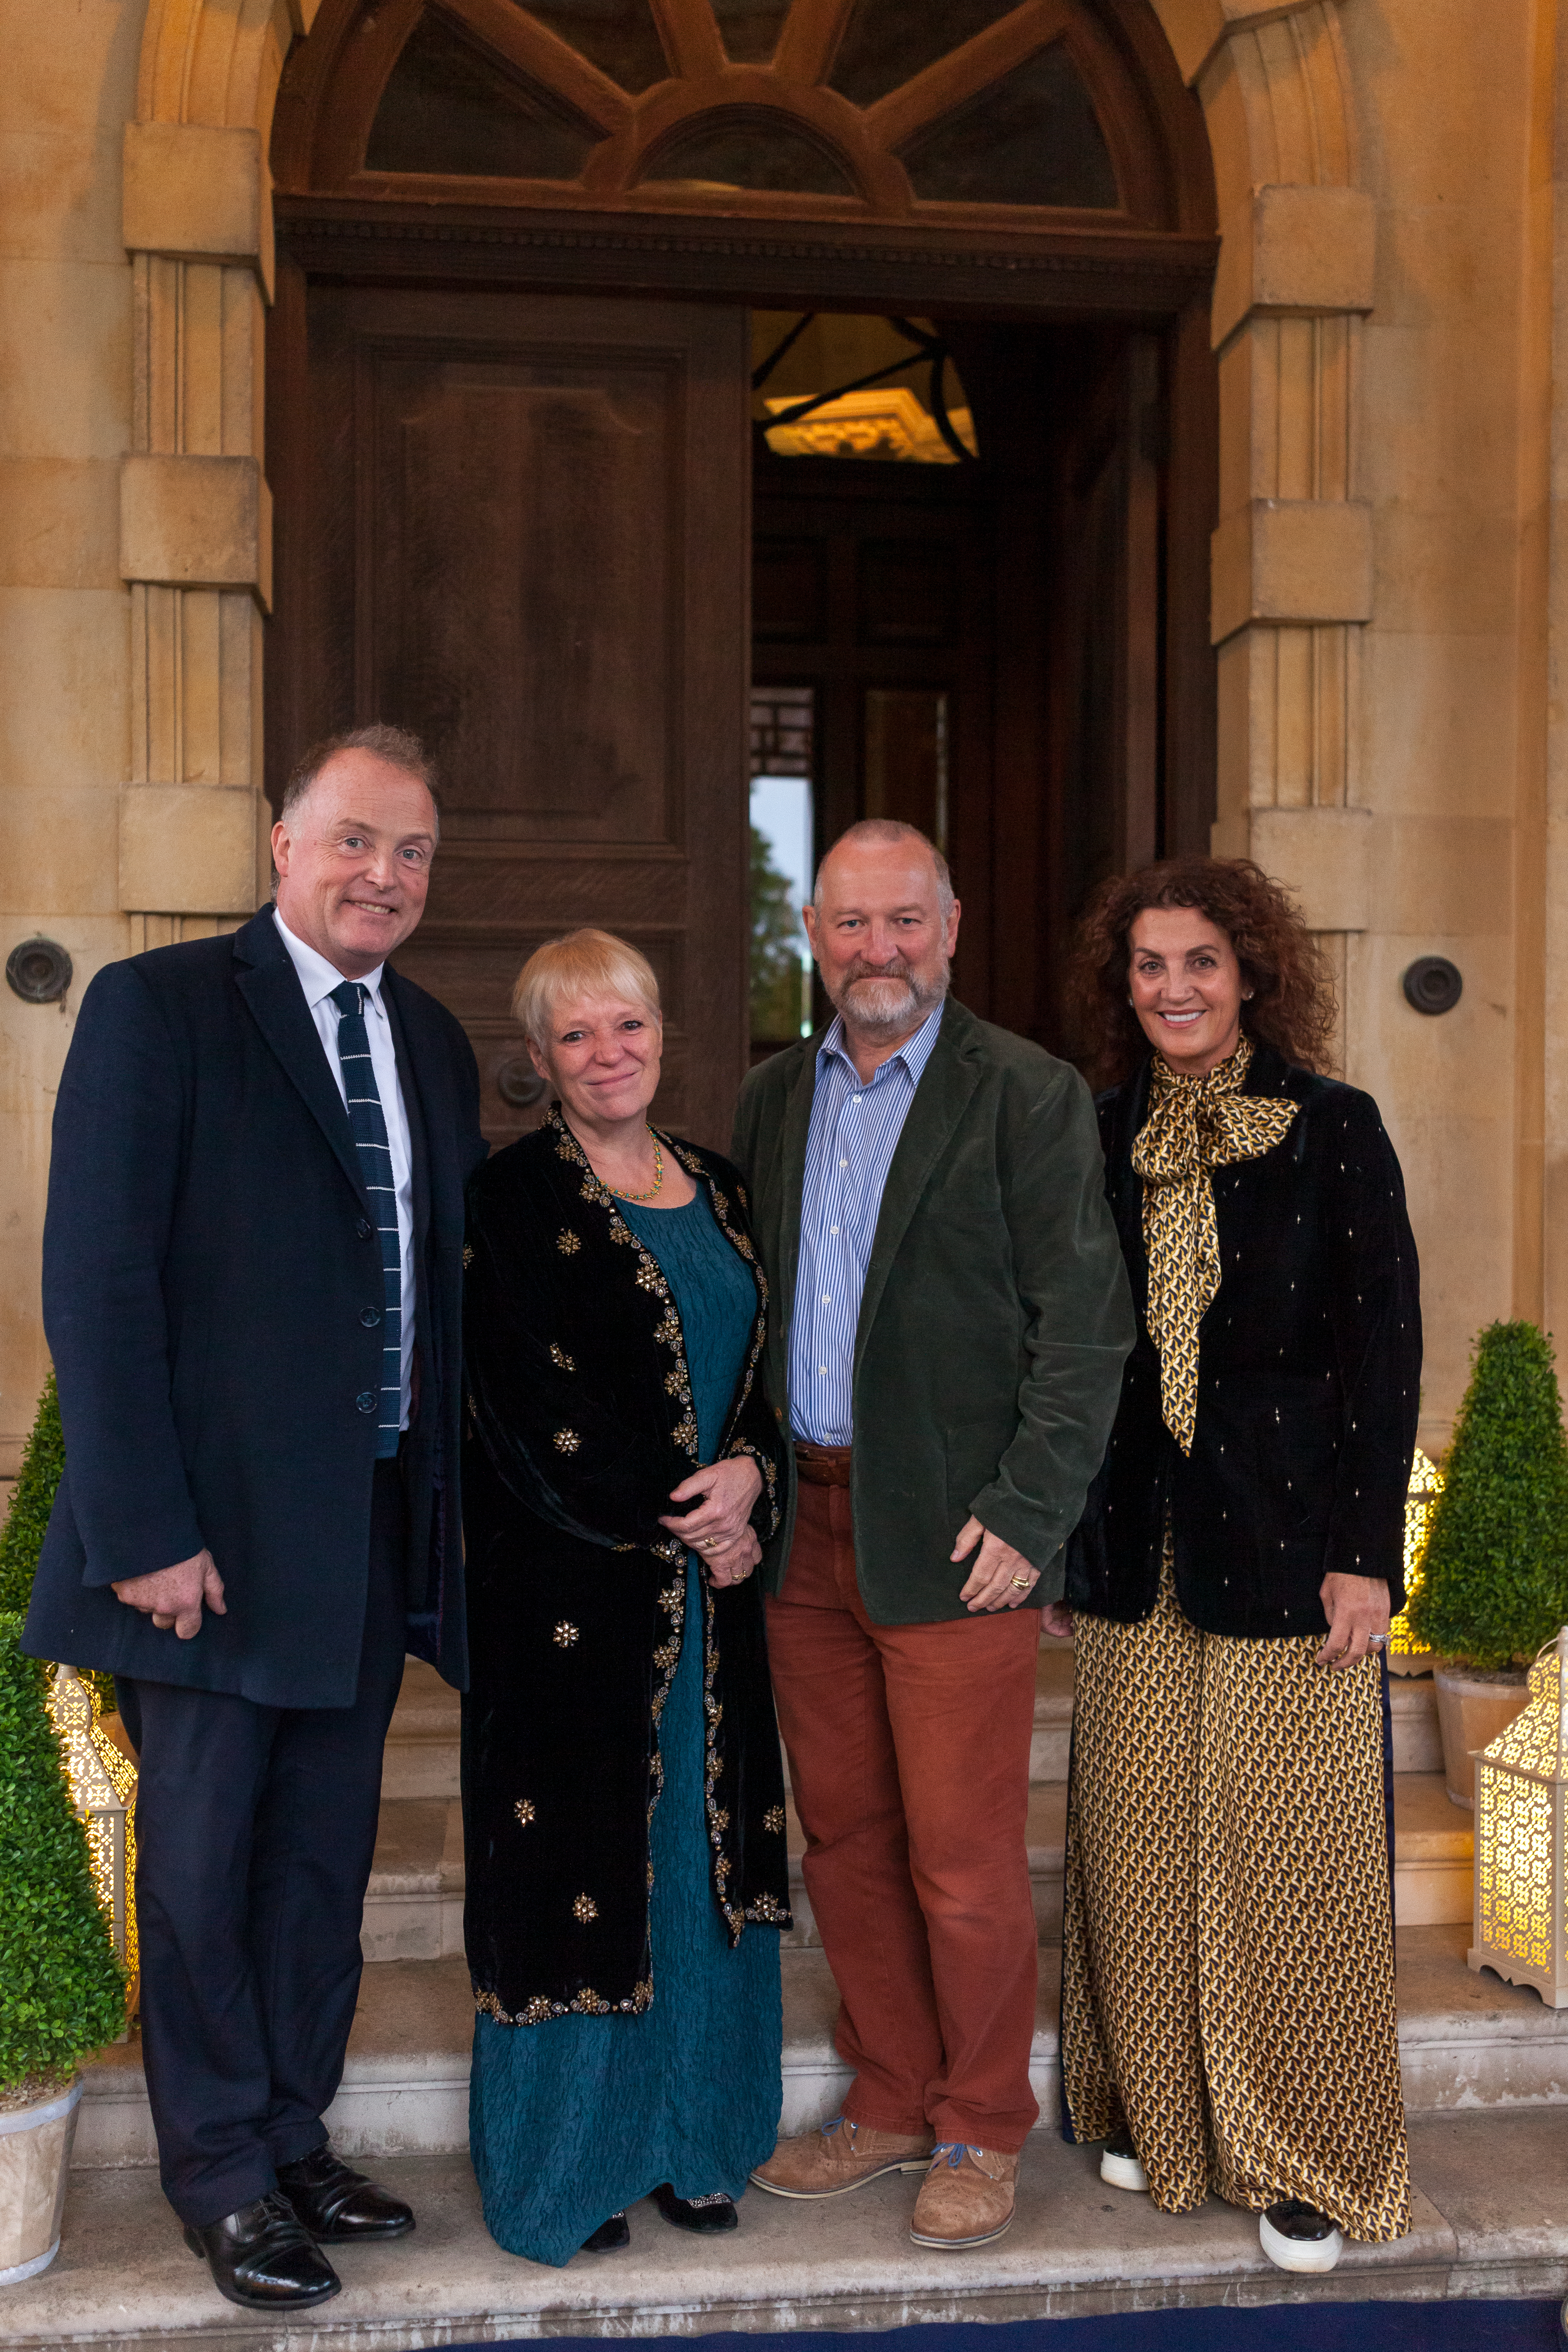 Lord Iveagh (left) at Elveden Hall where the charity event was held, with Imogen Sheeran, John Sheeran (parents of Ed Sheeran) and Gina Long (right). (Kerry McLaughlin Photography/ PA)